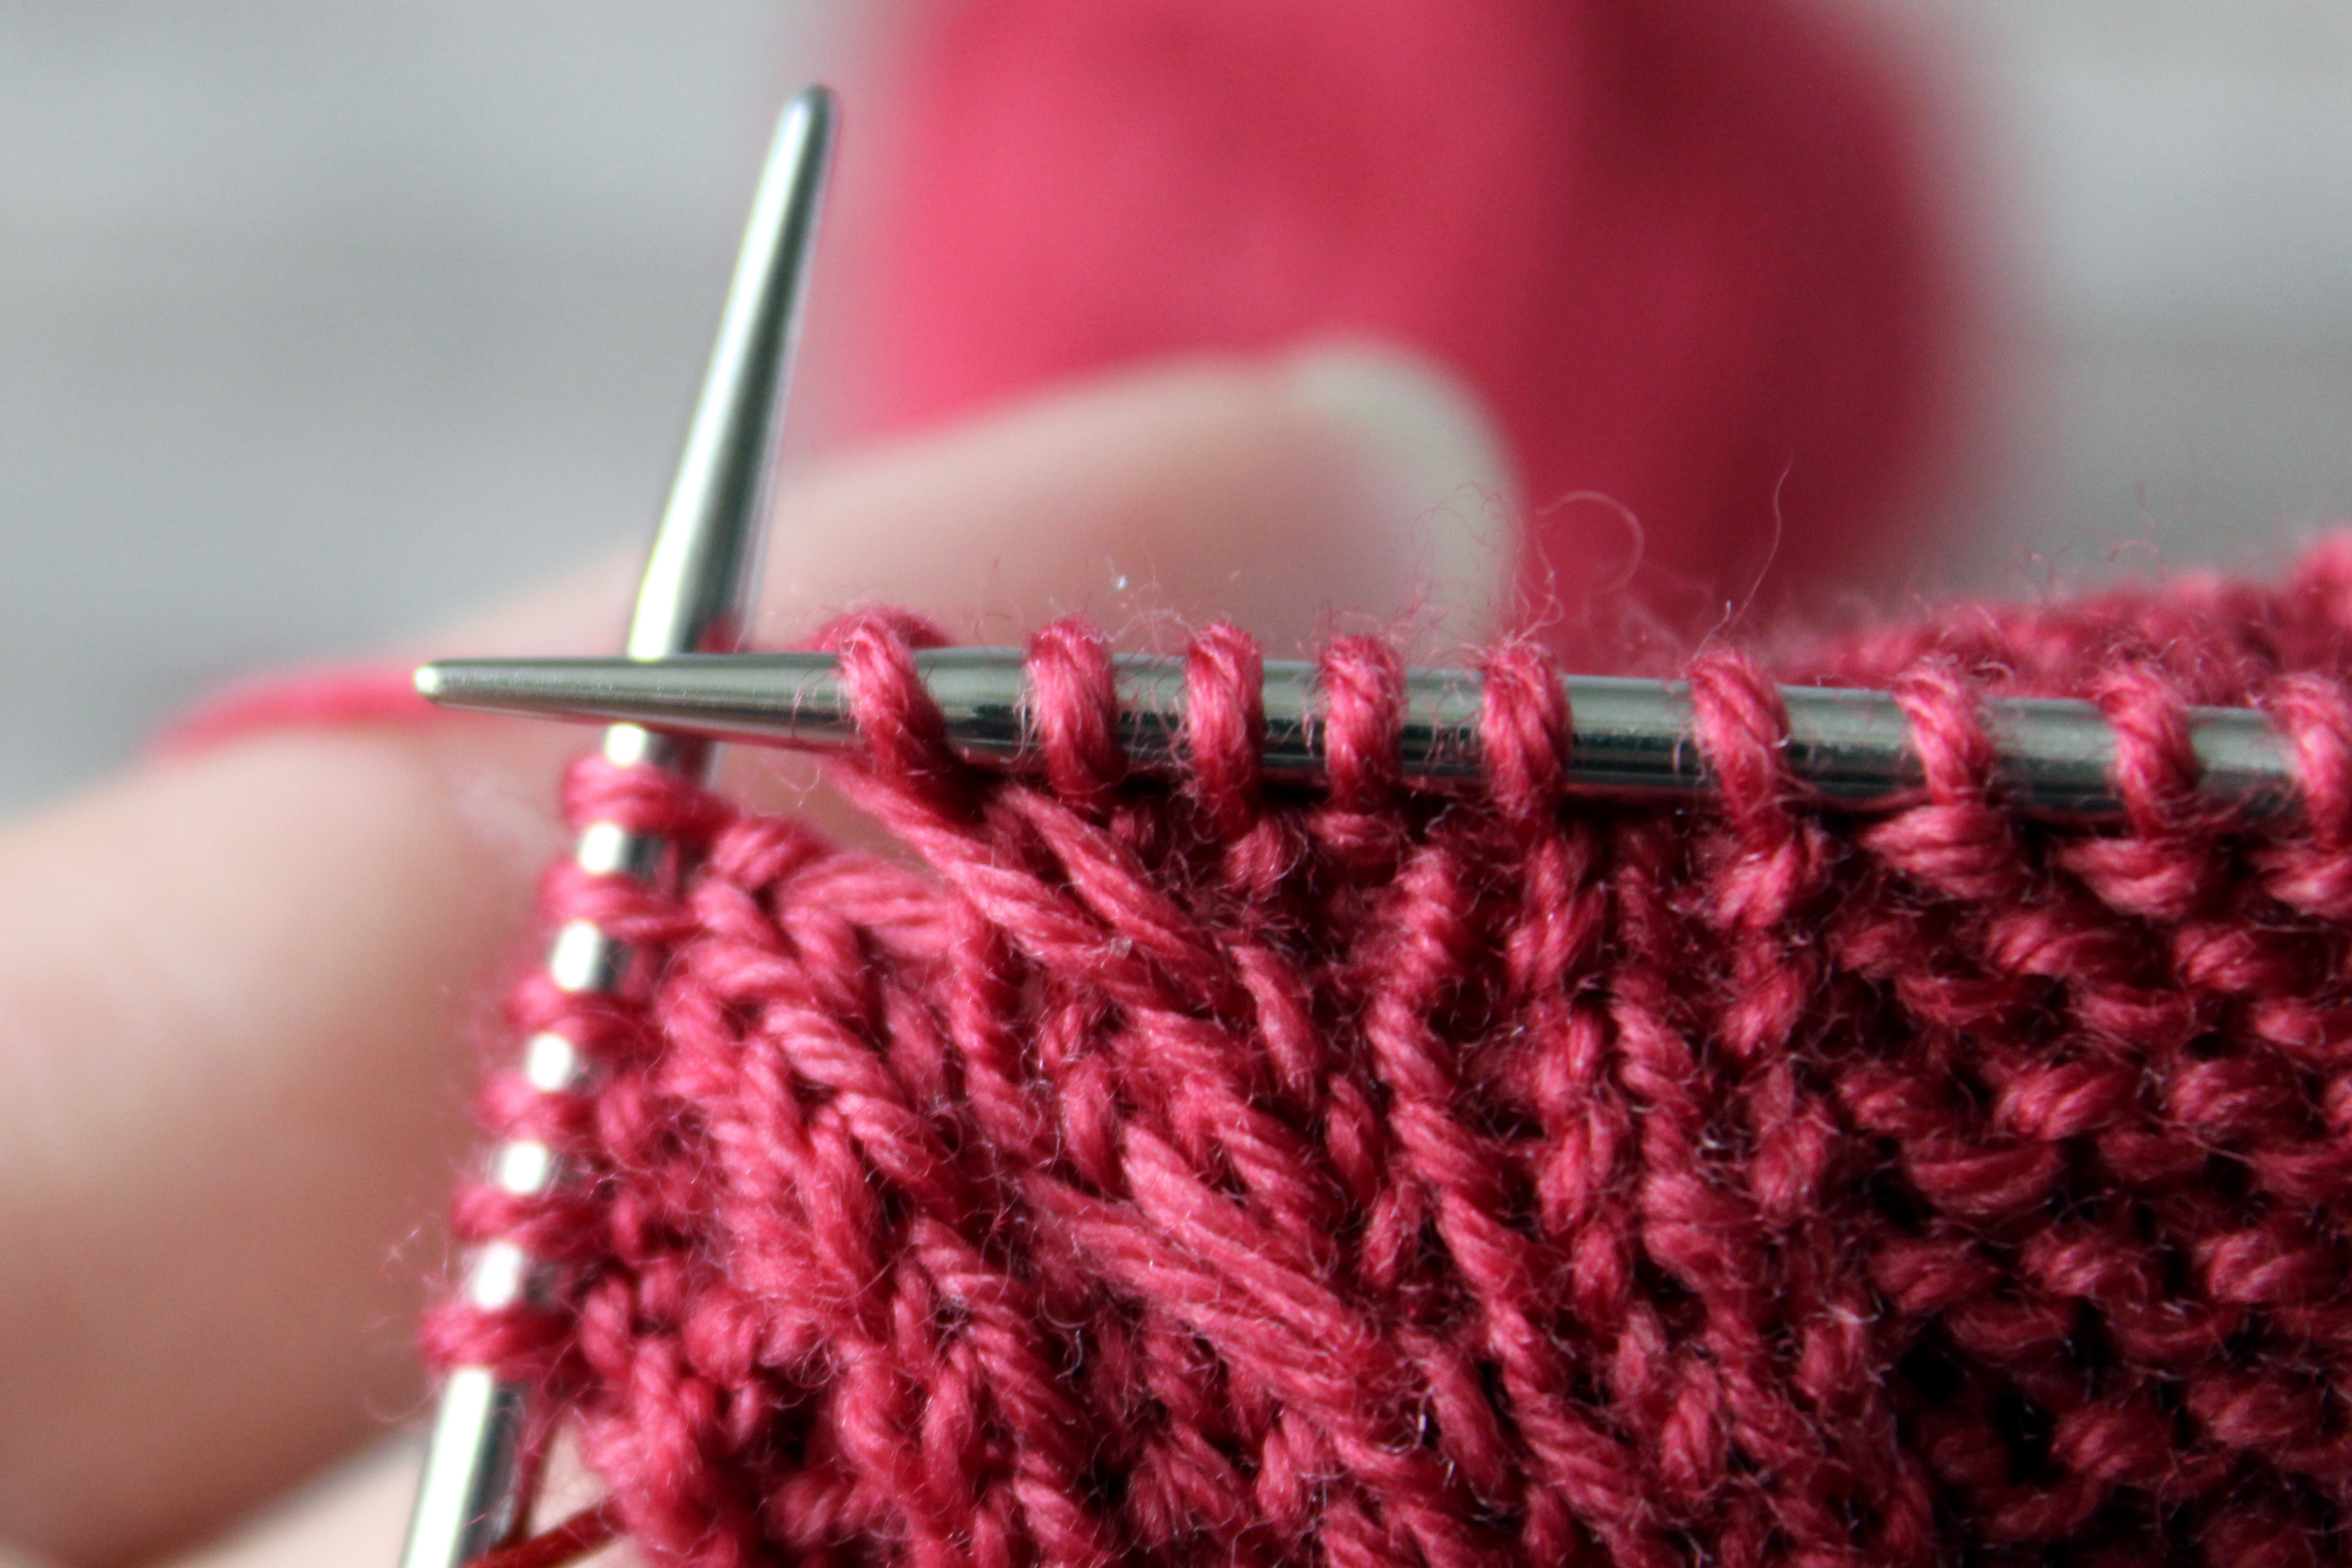 The three stitches have been knit onto the right hand needle completing the cable